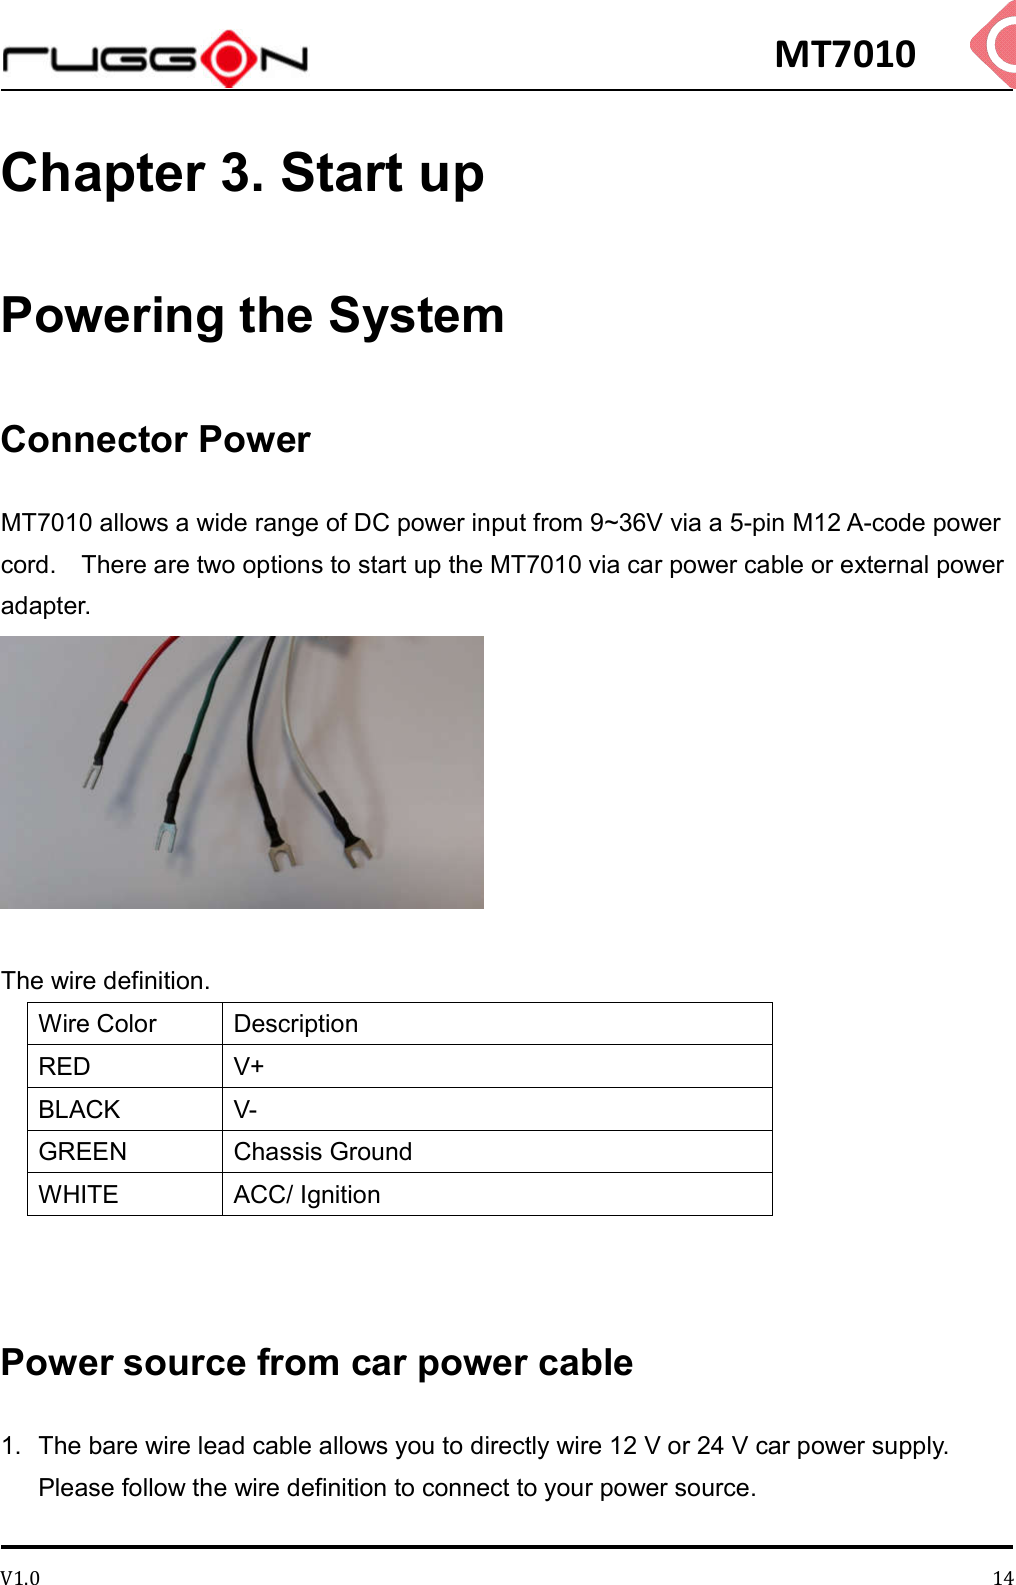 MT7010 V1.0 14Chapter 3. Start up Powering the System Connector Power MT7010 allows a wide range of DC power input from 9~36V via a 5-pin M12 A-code power cord.    There are two options to start up the MT7010 via car power cable or external power adapter.   The wire definition. Wire Color  Description RED  V+ BLACK  V- GREEN  Chassis Ground WHITE  ACC/ Ignition   Power source from car power cable 1.  The bare wire lead cable allows you to directly wire 12 V or 24 V car power supply. Please follow the wire definition to connect to your power source.    